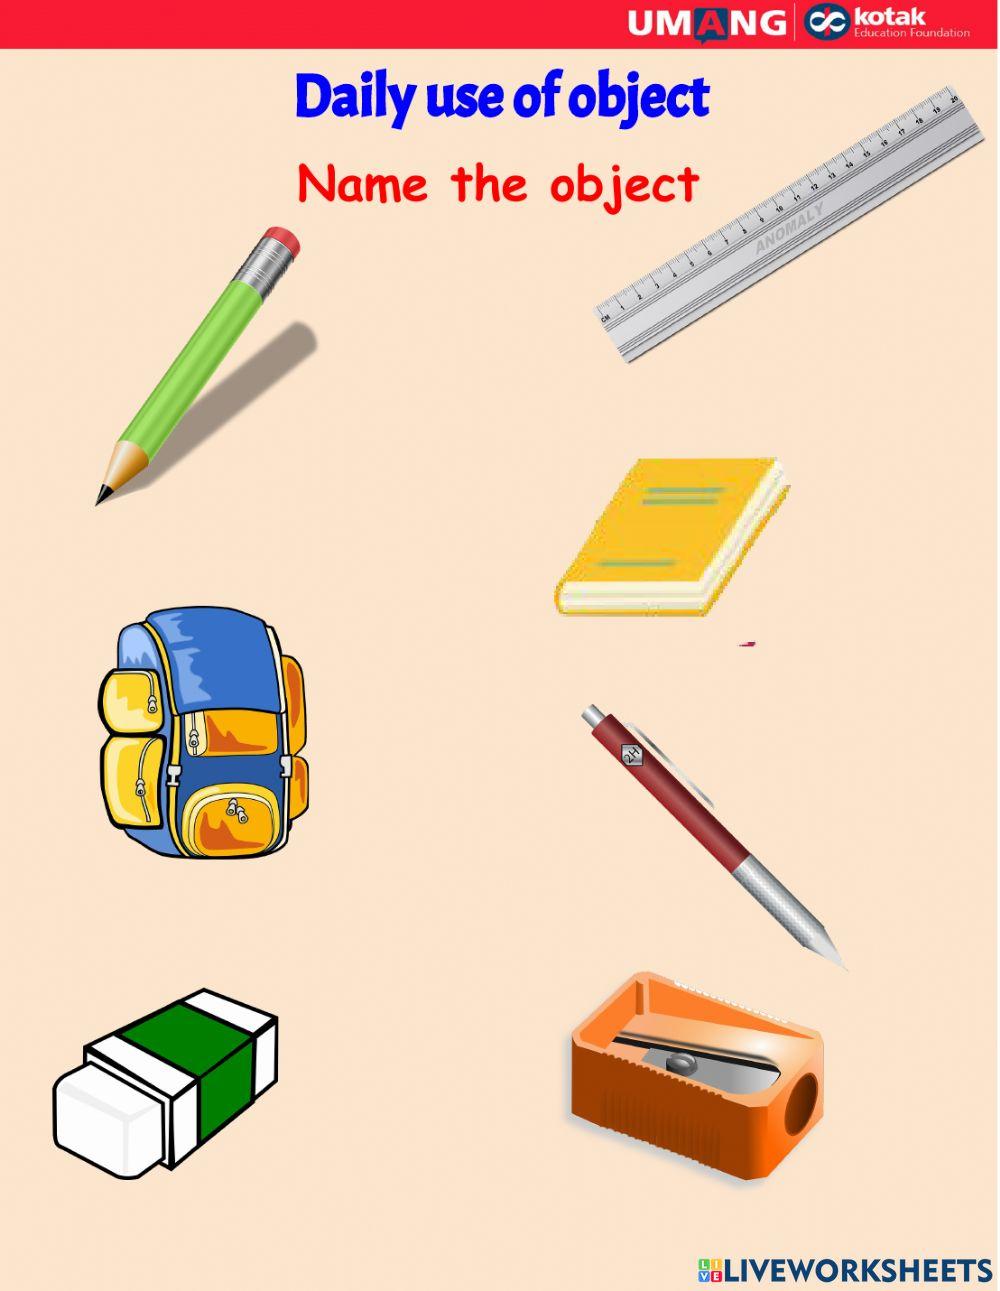 Daily use objects